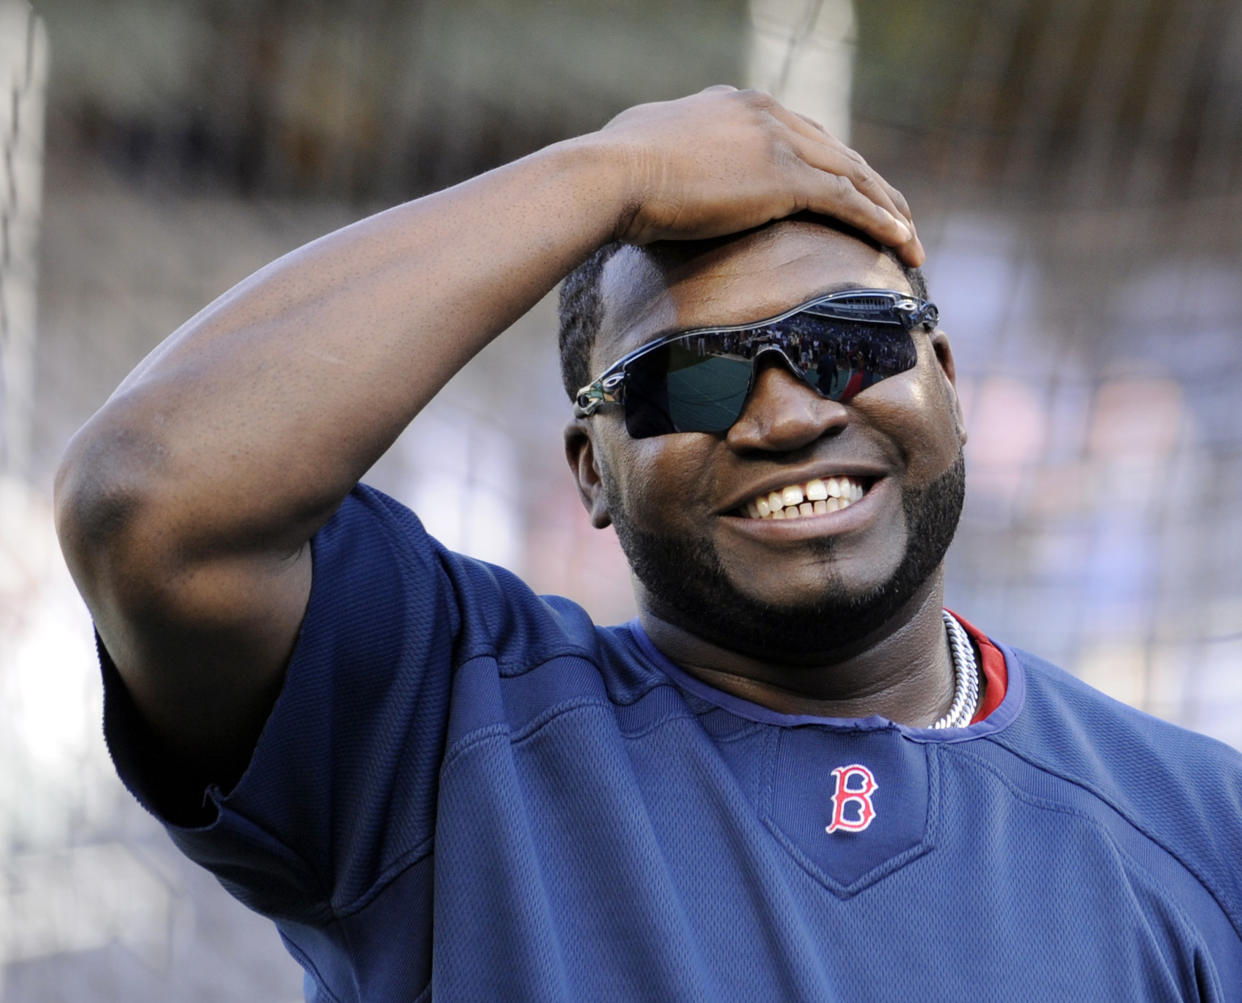 FILE - Boston Red Sox David Ortiz reacts before a baseball game against the New York Yankees, Friday, Aug. 7, 2009, at Yankee Stadium in New York. Ortiz knows a thing or two about clutch swings late in the game. But he might put this one away in his first at-bat. Ortiz, a 10-time All-Star who spent most of his career with the Boston Red Sox, leads a group of 13 first-time eligible players getting serious consideration from voters for the Baseball Hall of Fame. (AP Photo/Bill Kostroun, File)